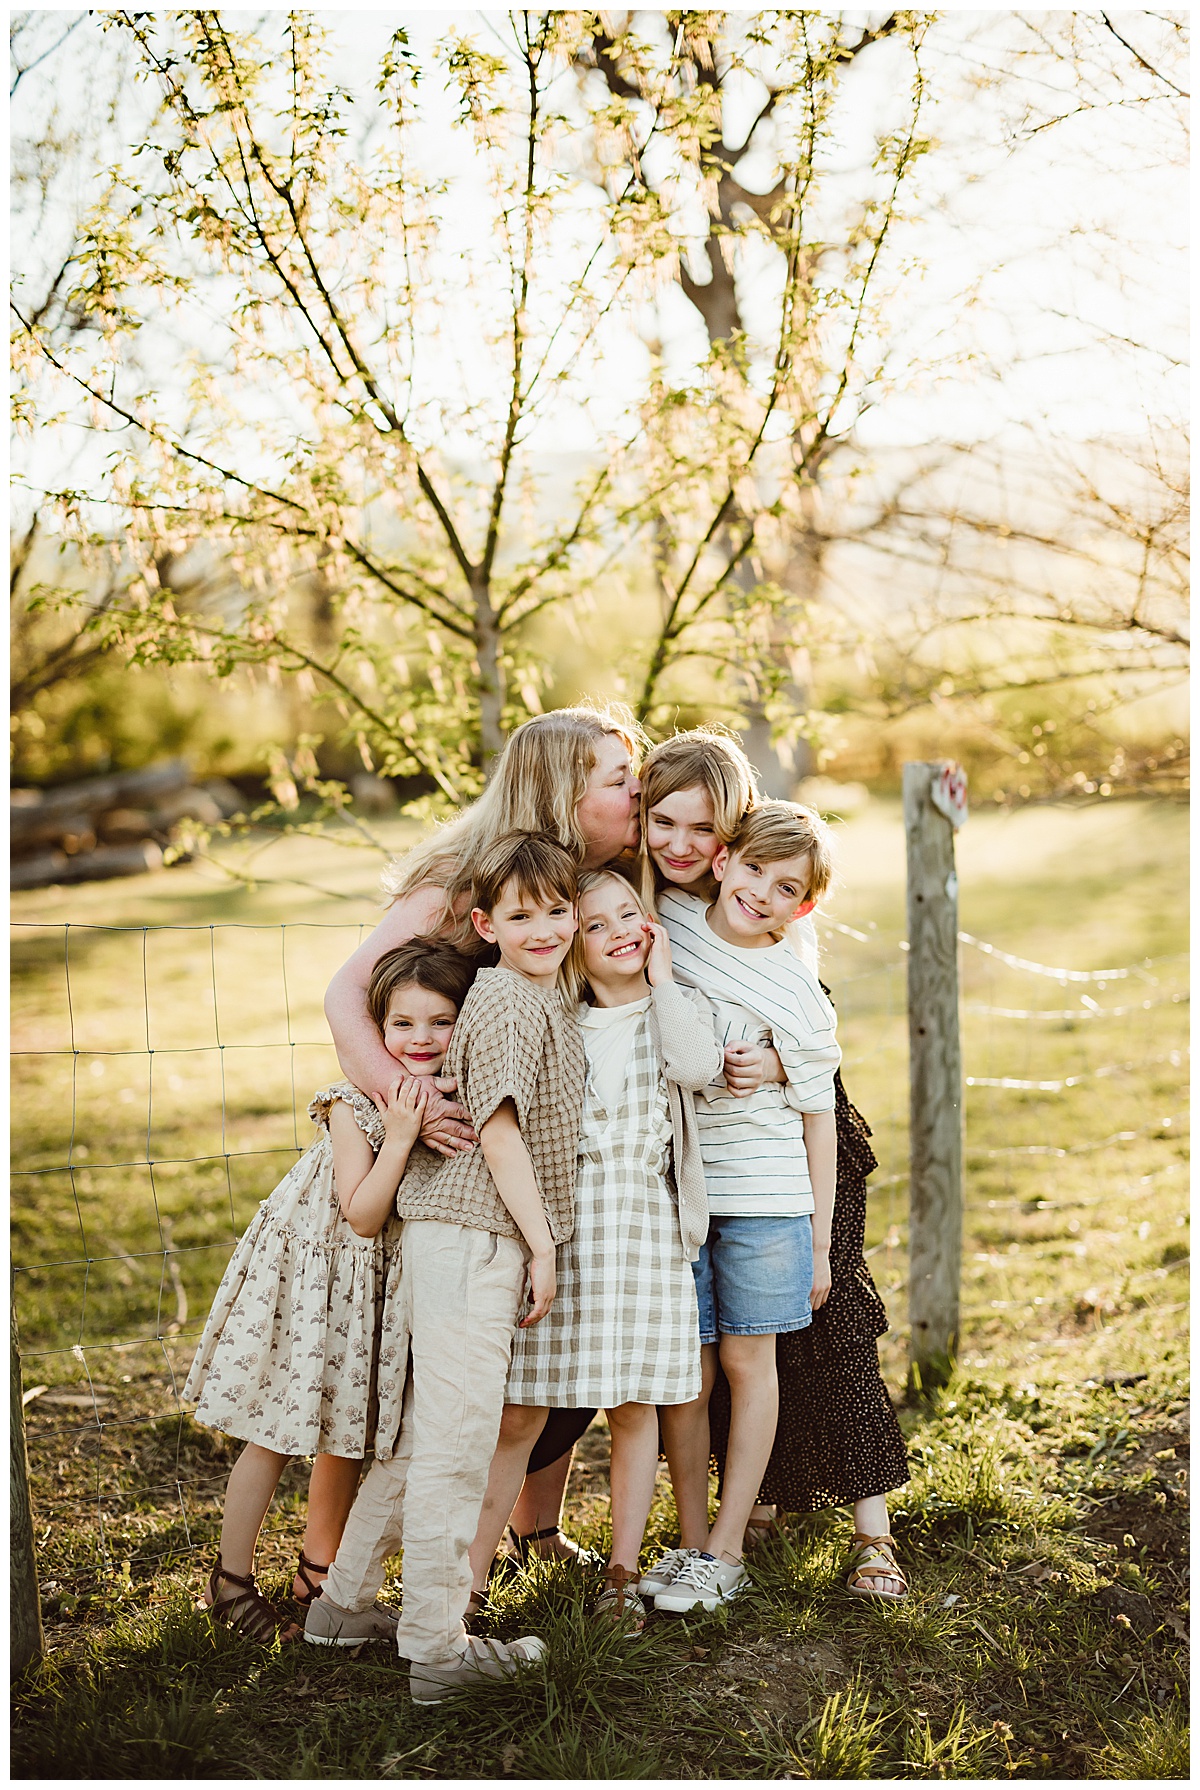 Kids stand close together during their Blue Ridge Mountains Family Photos